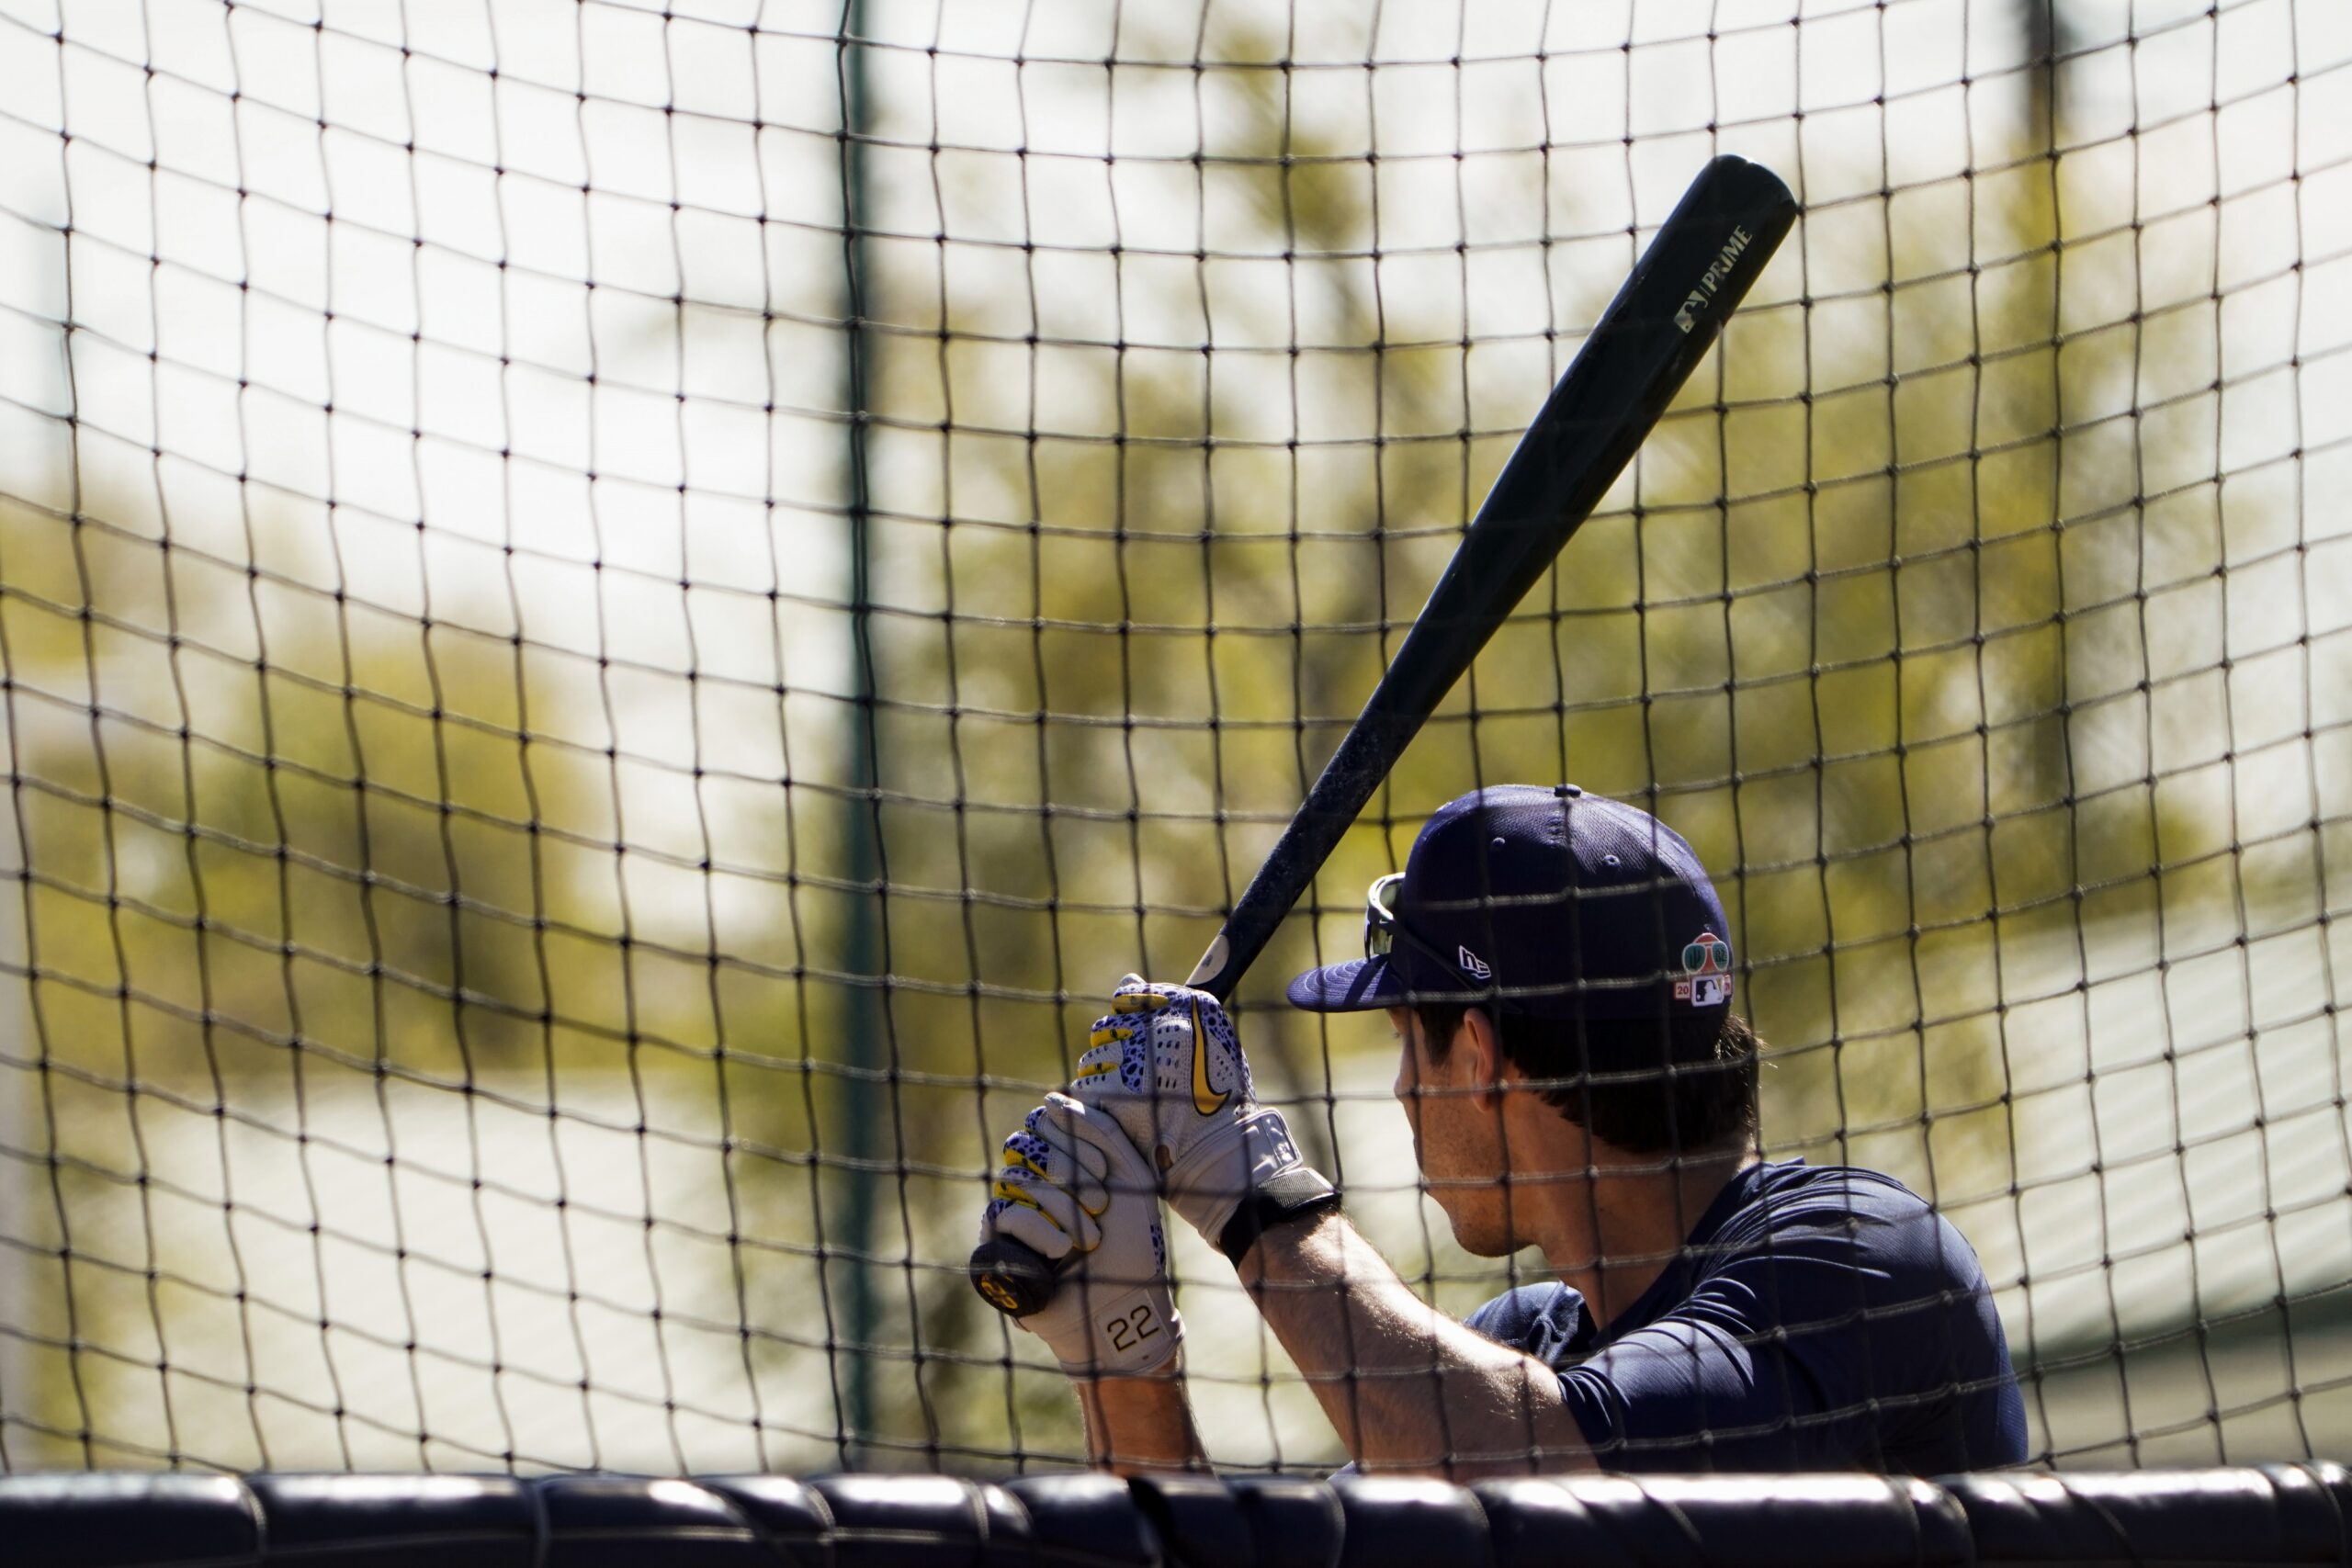 Outfielder Christian Yelich of the Milwaukee Brewers takes batting practice in Arizona